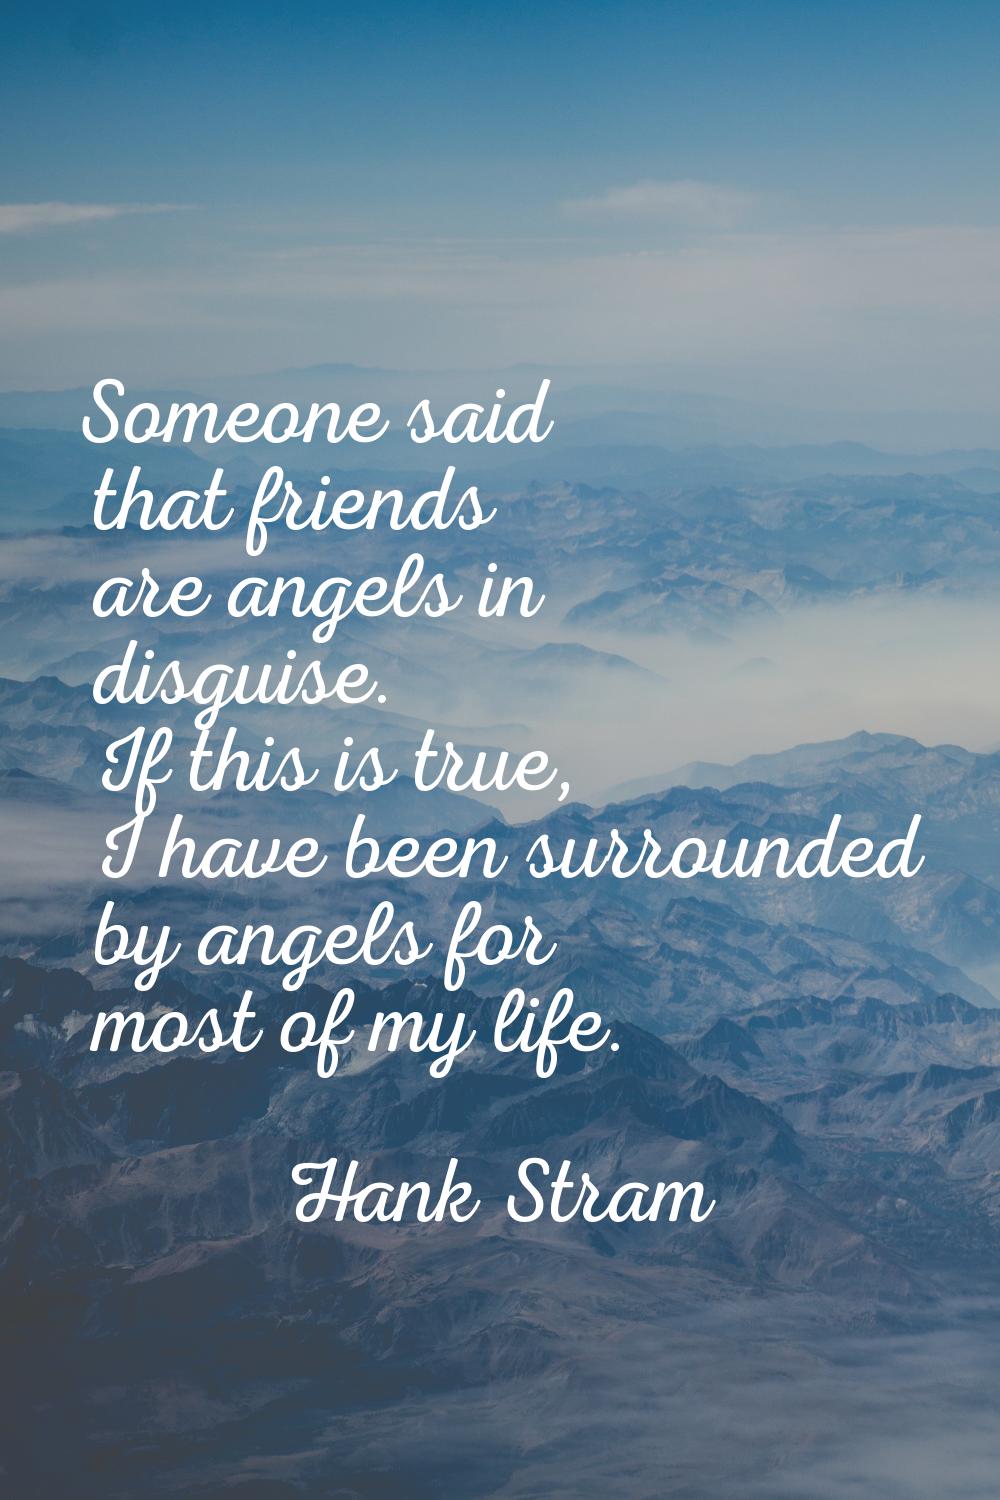 Someone said that friends are angels in disguise. If this is true, I have been surrounded by angels